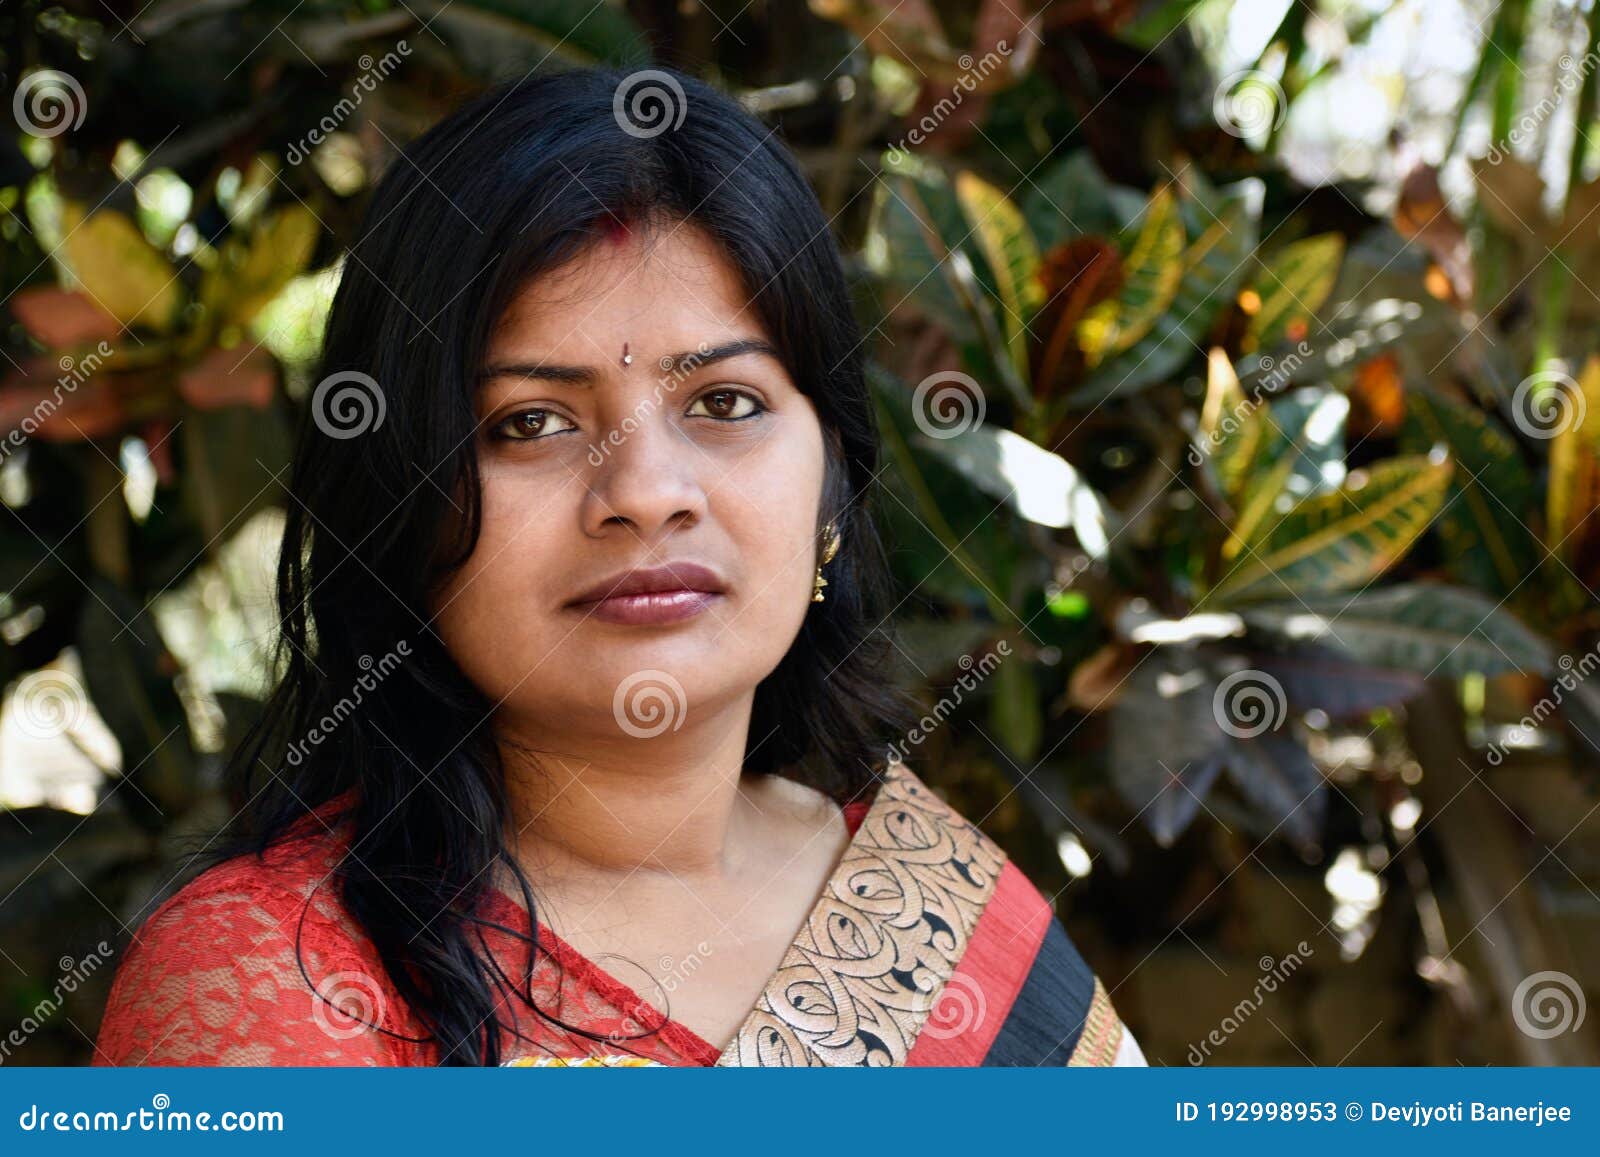 The Indian Housewife in the Casual Clothing on a Forest Backgroud Stock  Image - Image of dress, elegance: 192998953